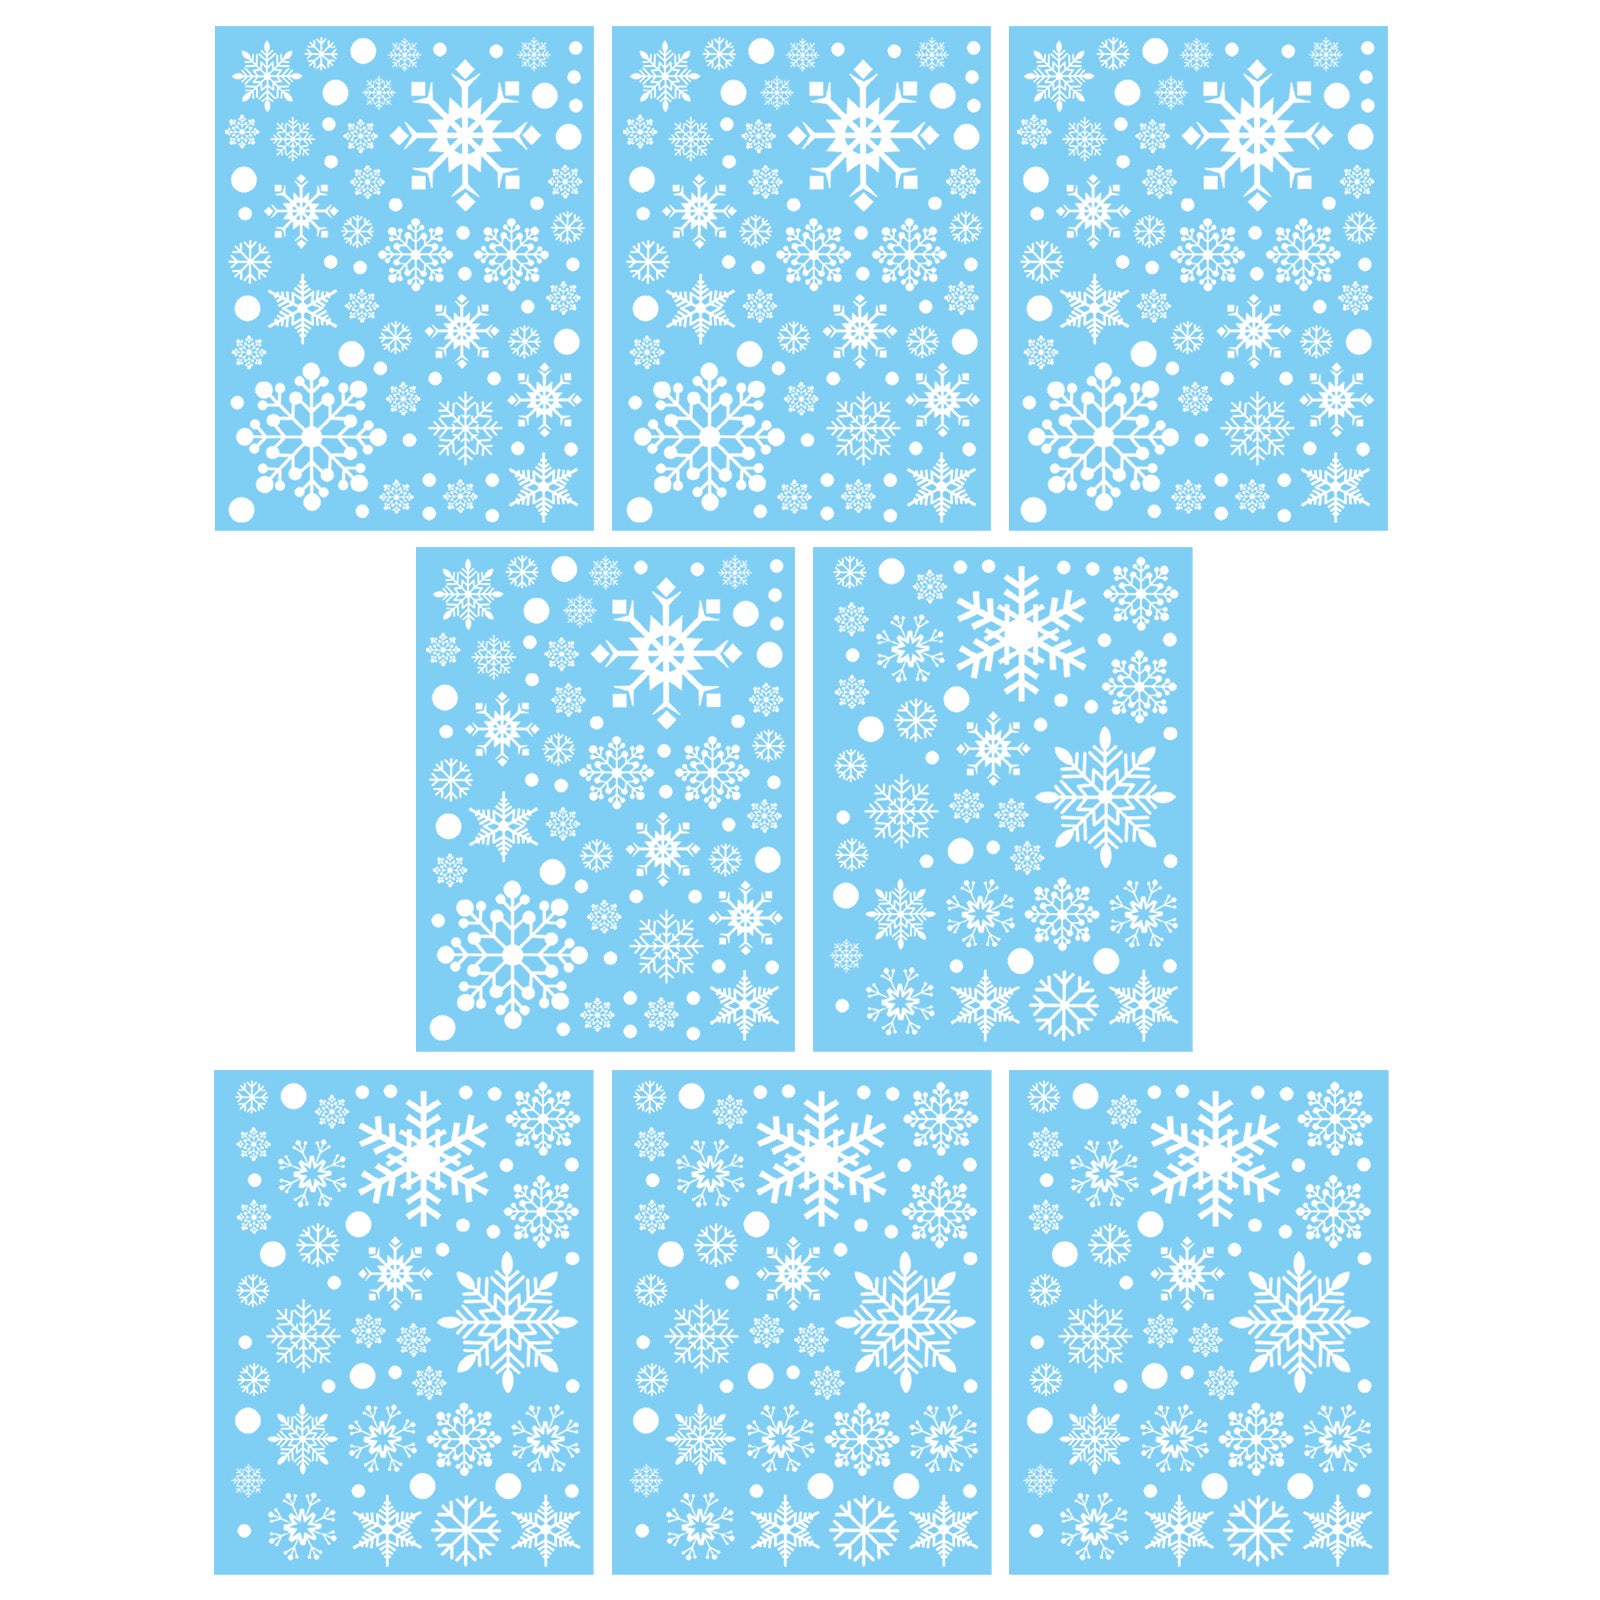 Wrapables Snowflake Window Clings Decal Stickers, Christmas Winter Decoration for Glass Windows